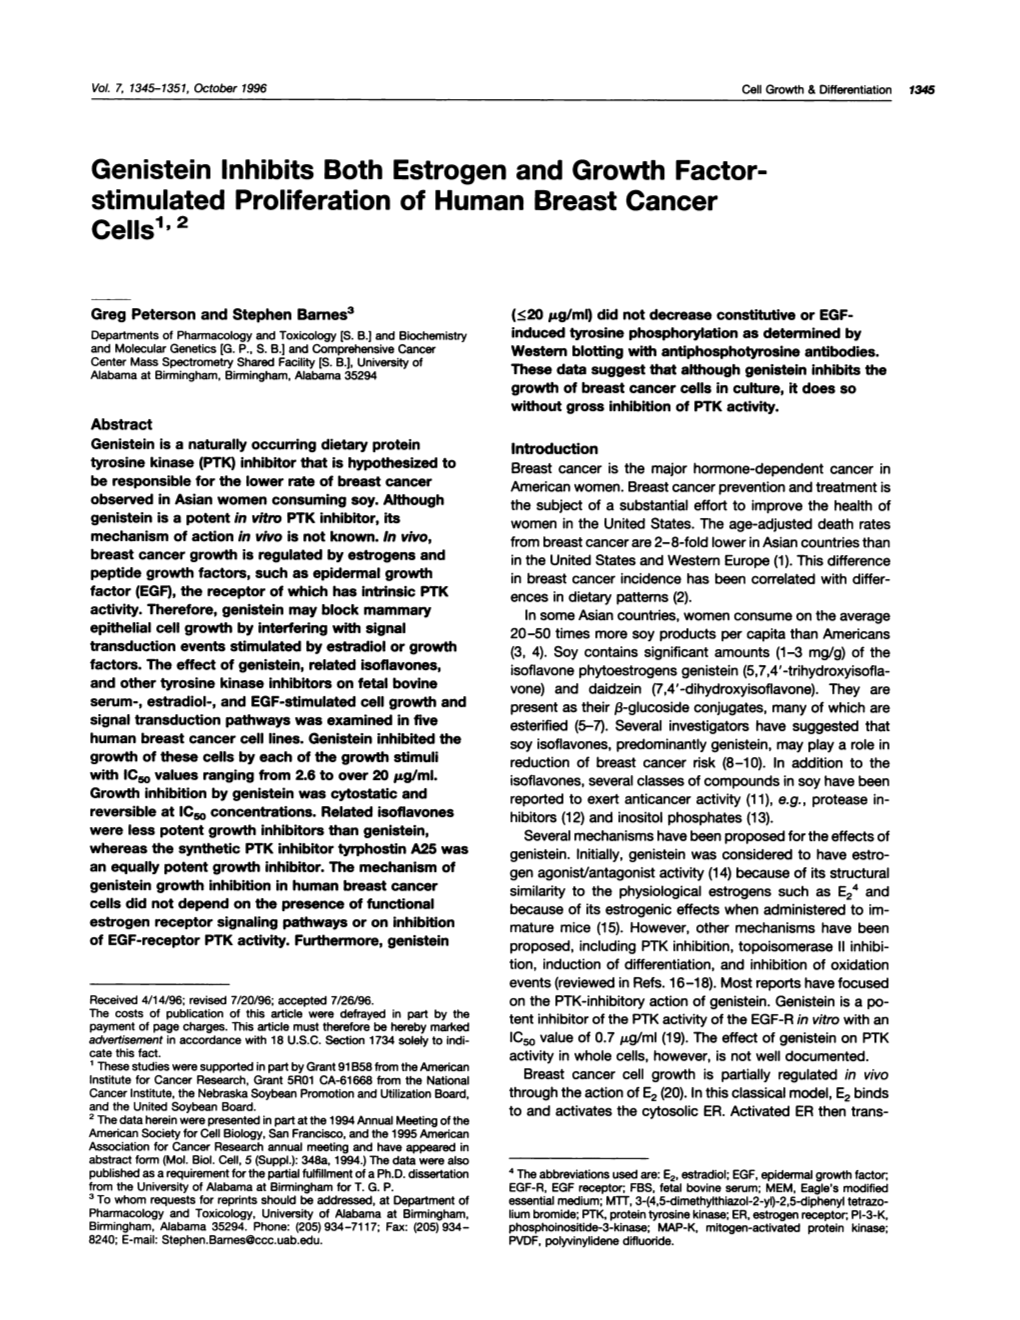 Genistein Inhibits Both Estrogen and Growth Factor- Stimulated Proliferation of Human Breast Cancer Cells1’ 2